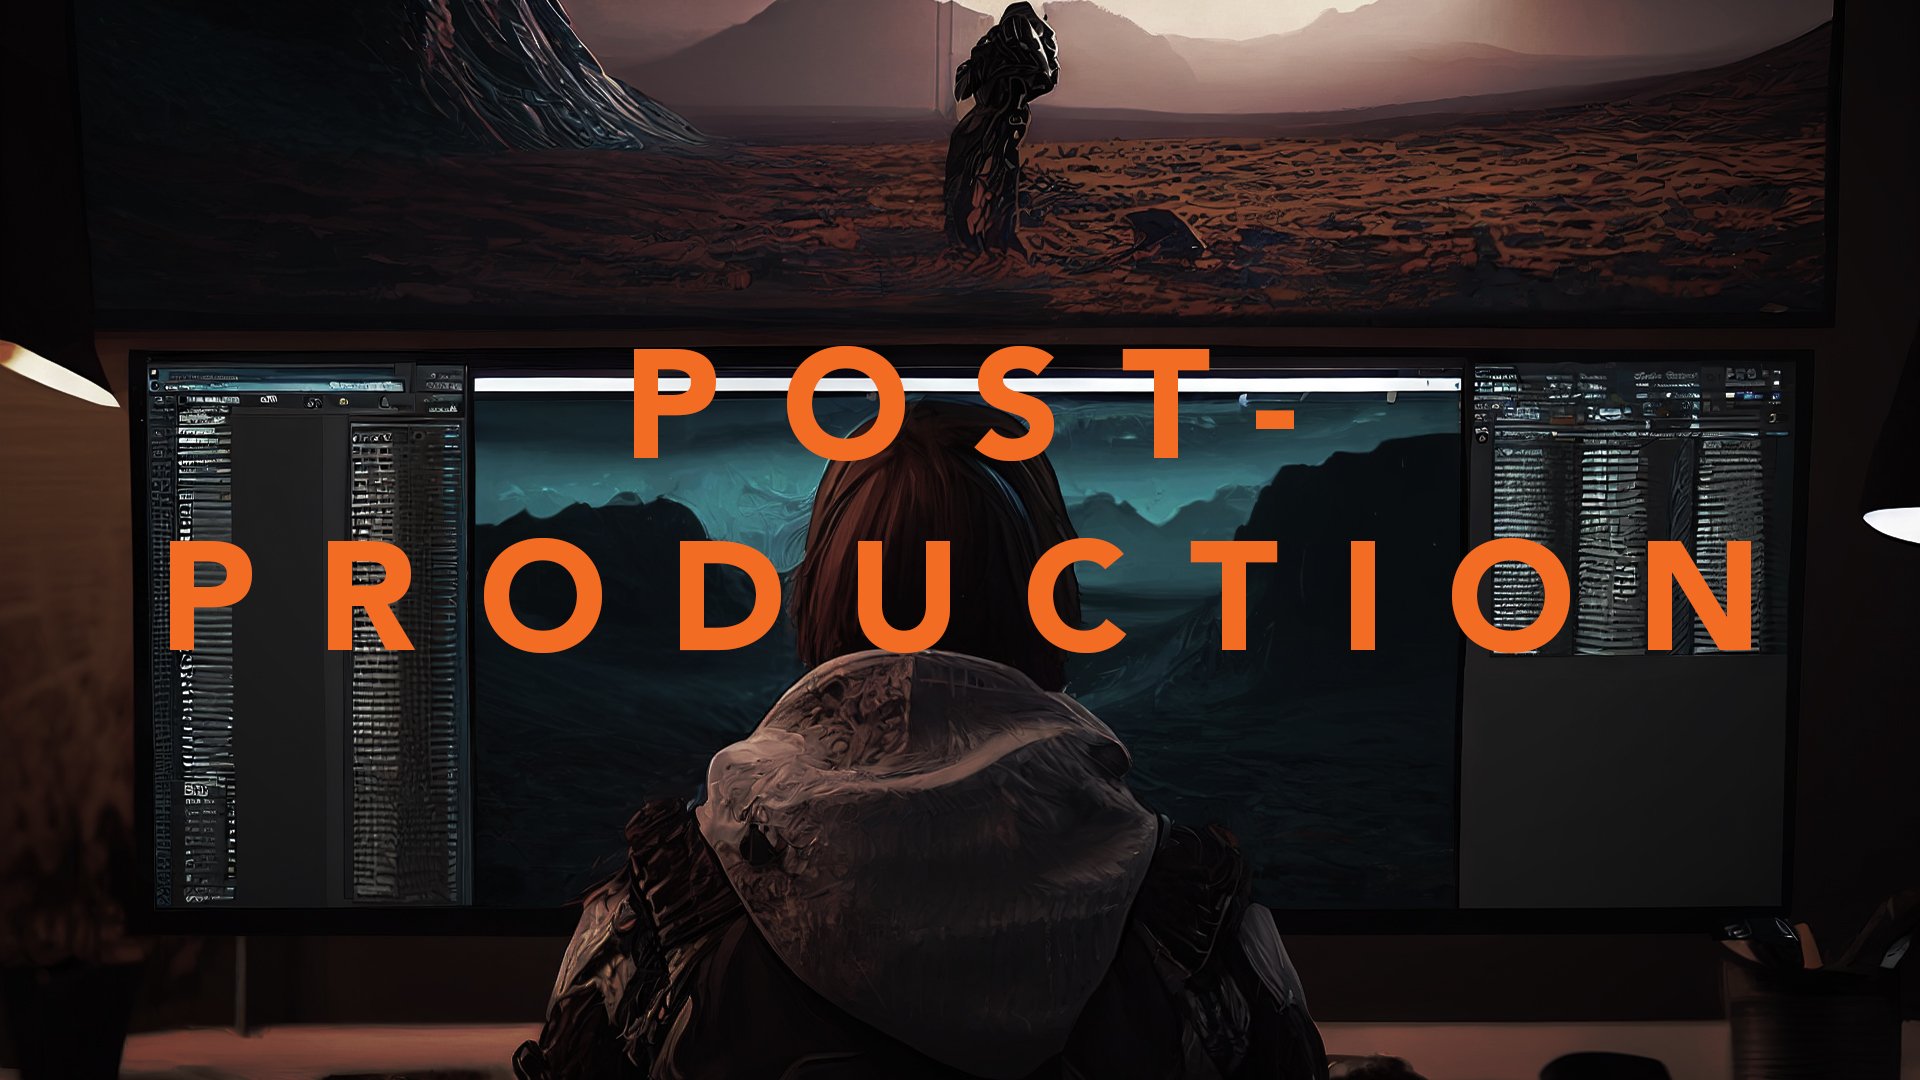 Post-production <p>You already have footage? We can provide conceptual design, editing, VFX, voice recording, or music overlay. </p>